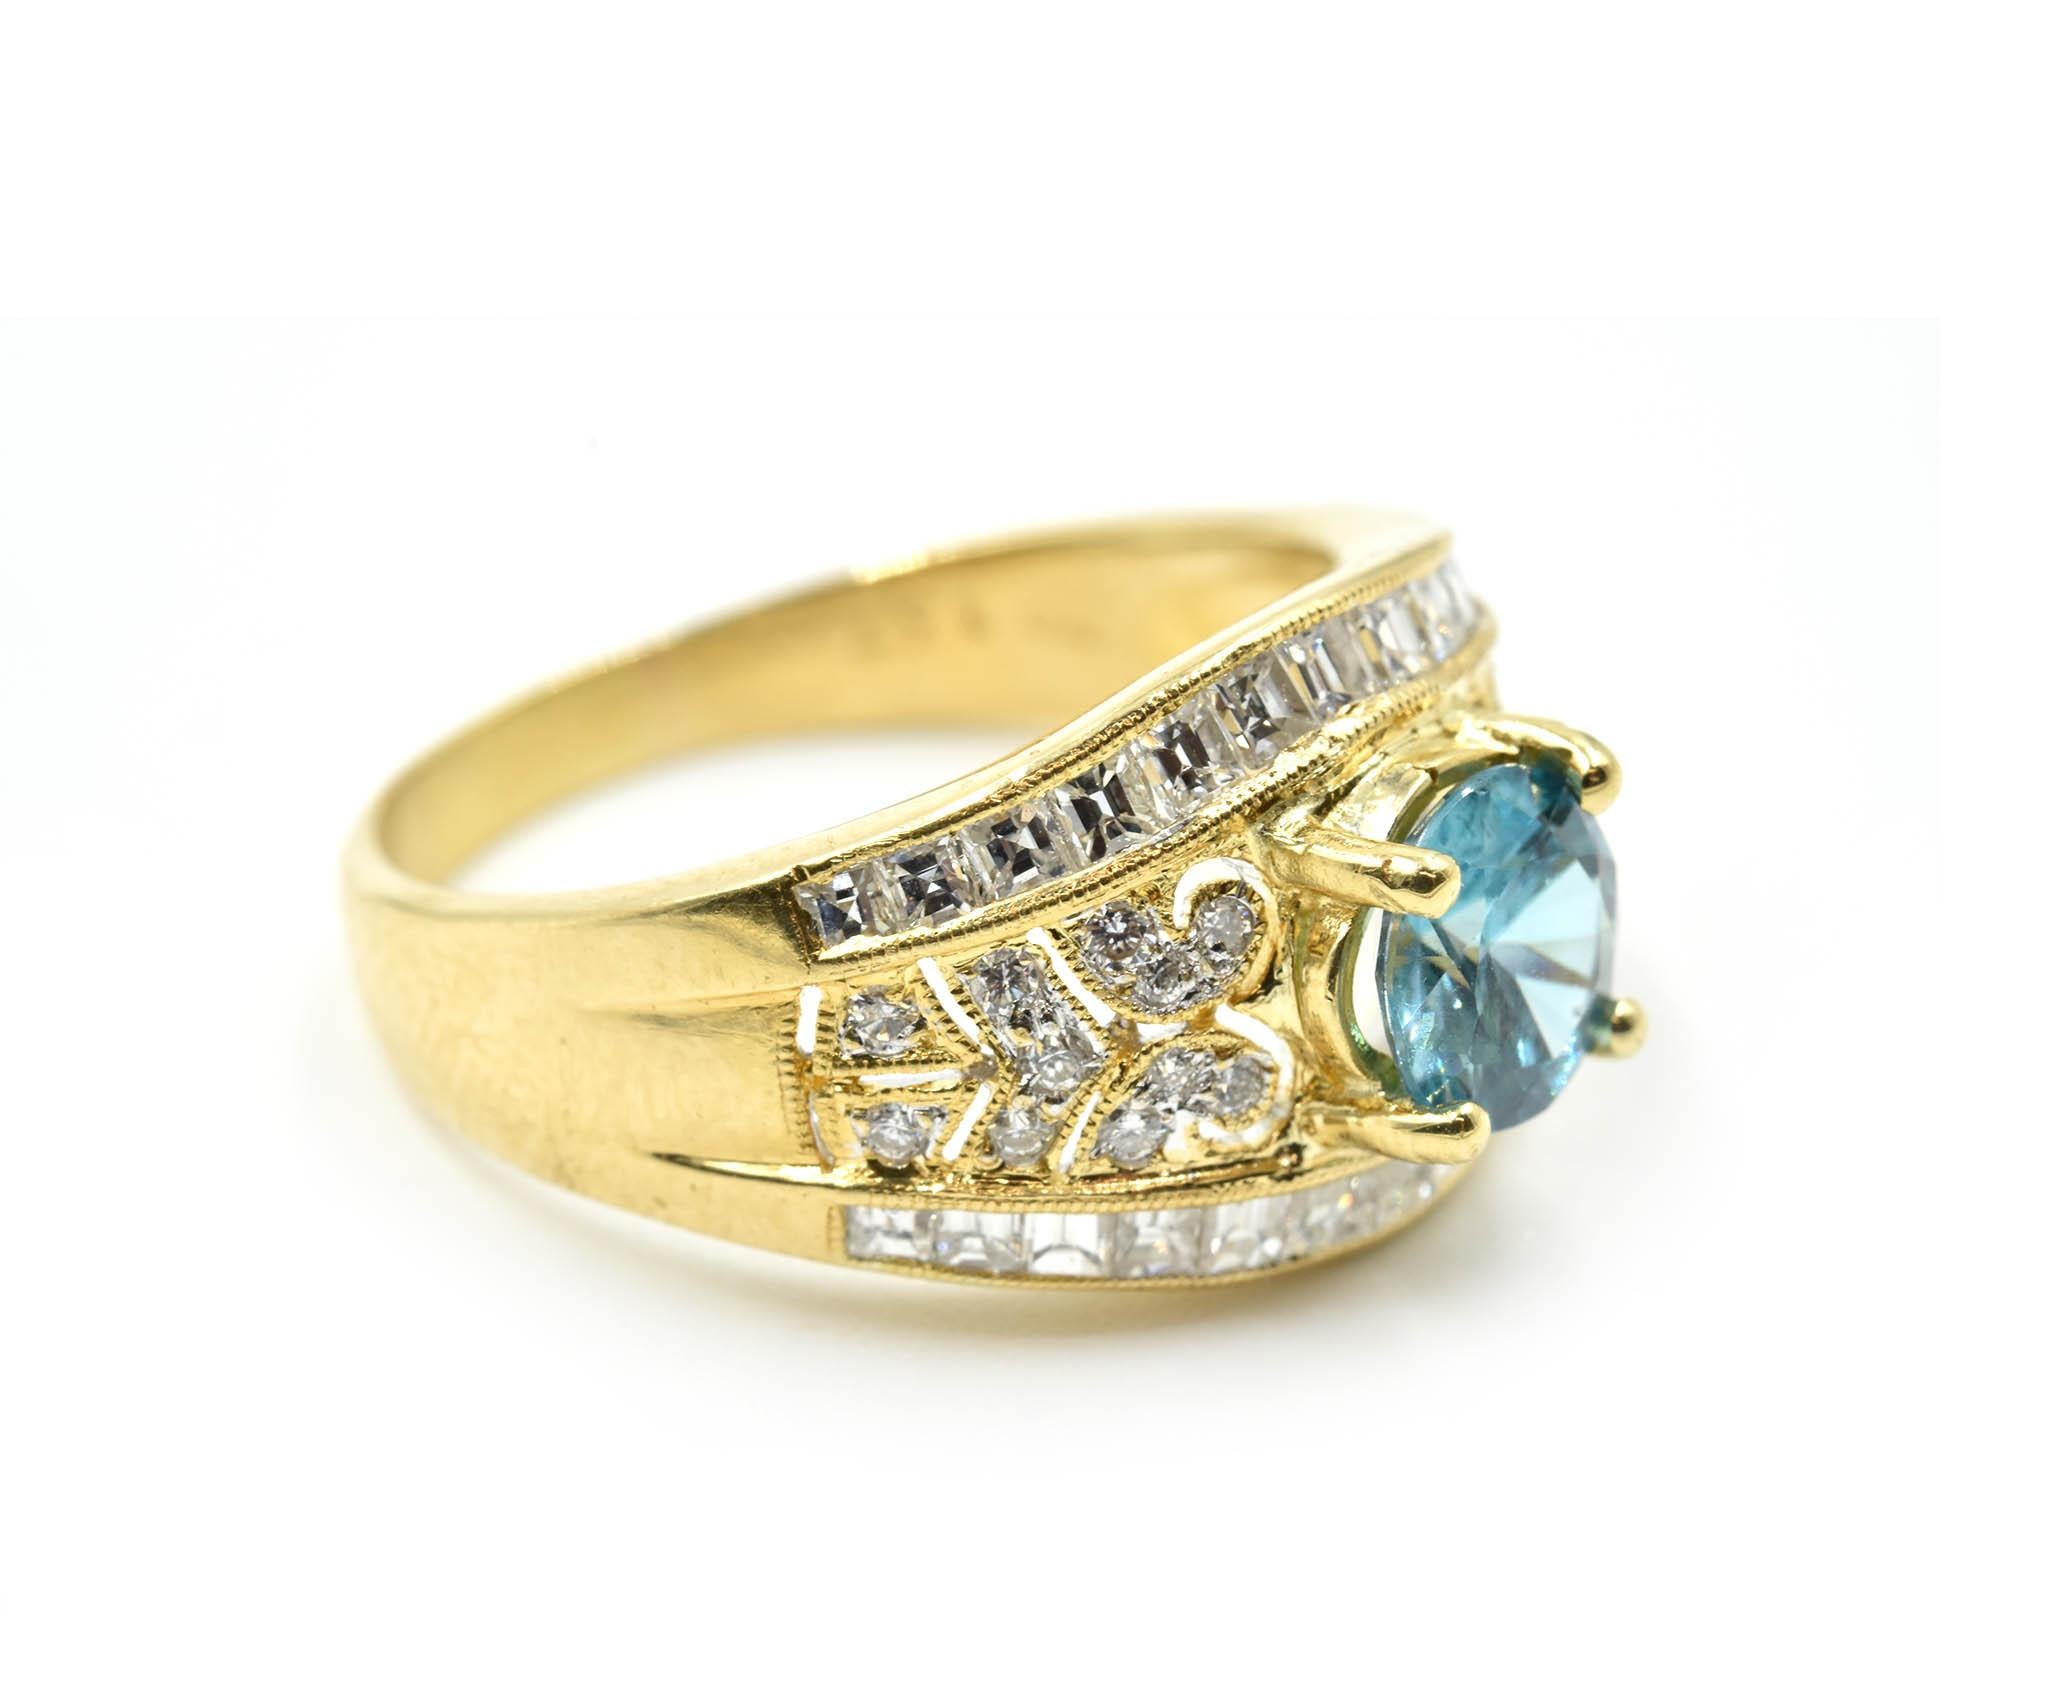 Designer: custom design
Material: 18k yellow gold
Blue Zircon: one round cut 1.40 carat blue zircon
Diamonds: 48 round and princess cuts = 0.74 carat total weight
Dimensions: ring top is a ½-inch long and ¾-inches wide
Ring Size: 8 (please allow two